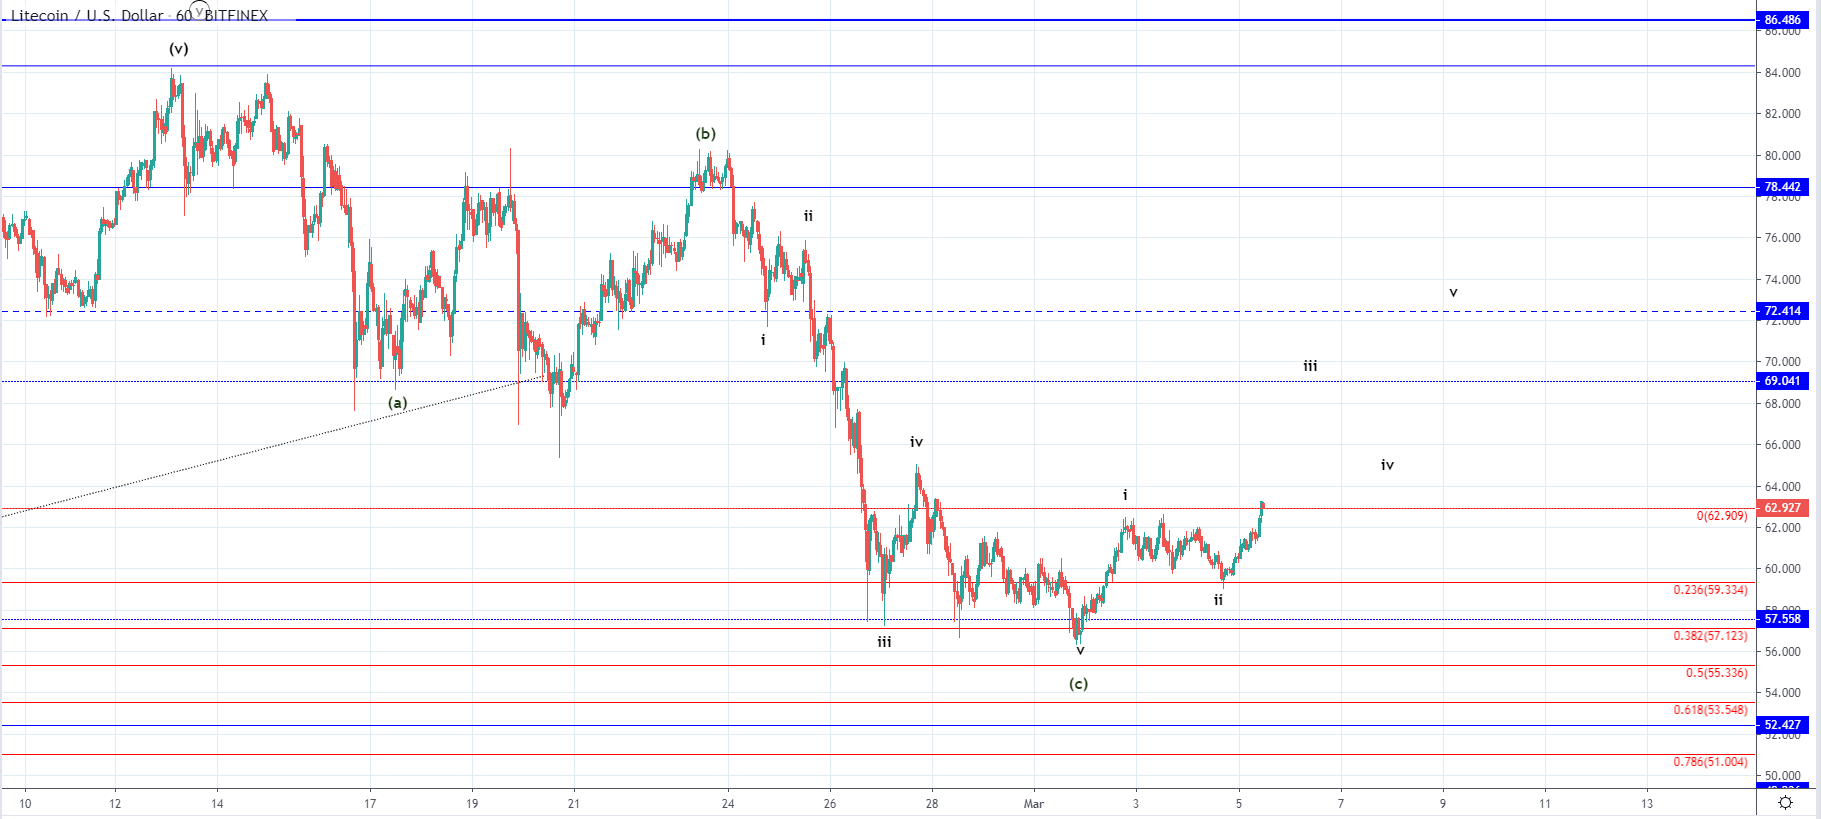 LTC and EOS - Bullishness seen but for how long?